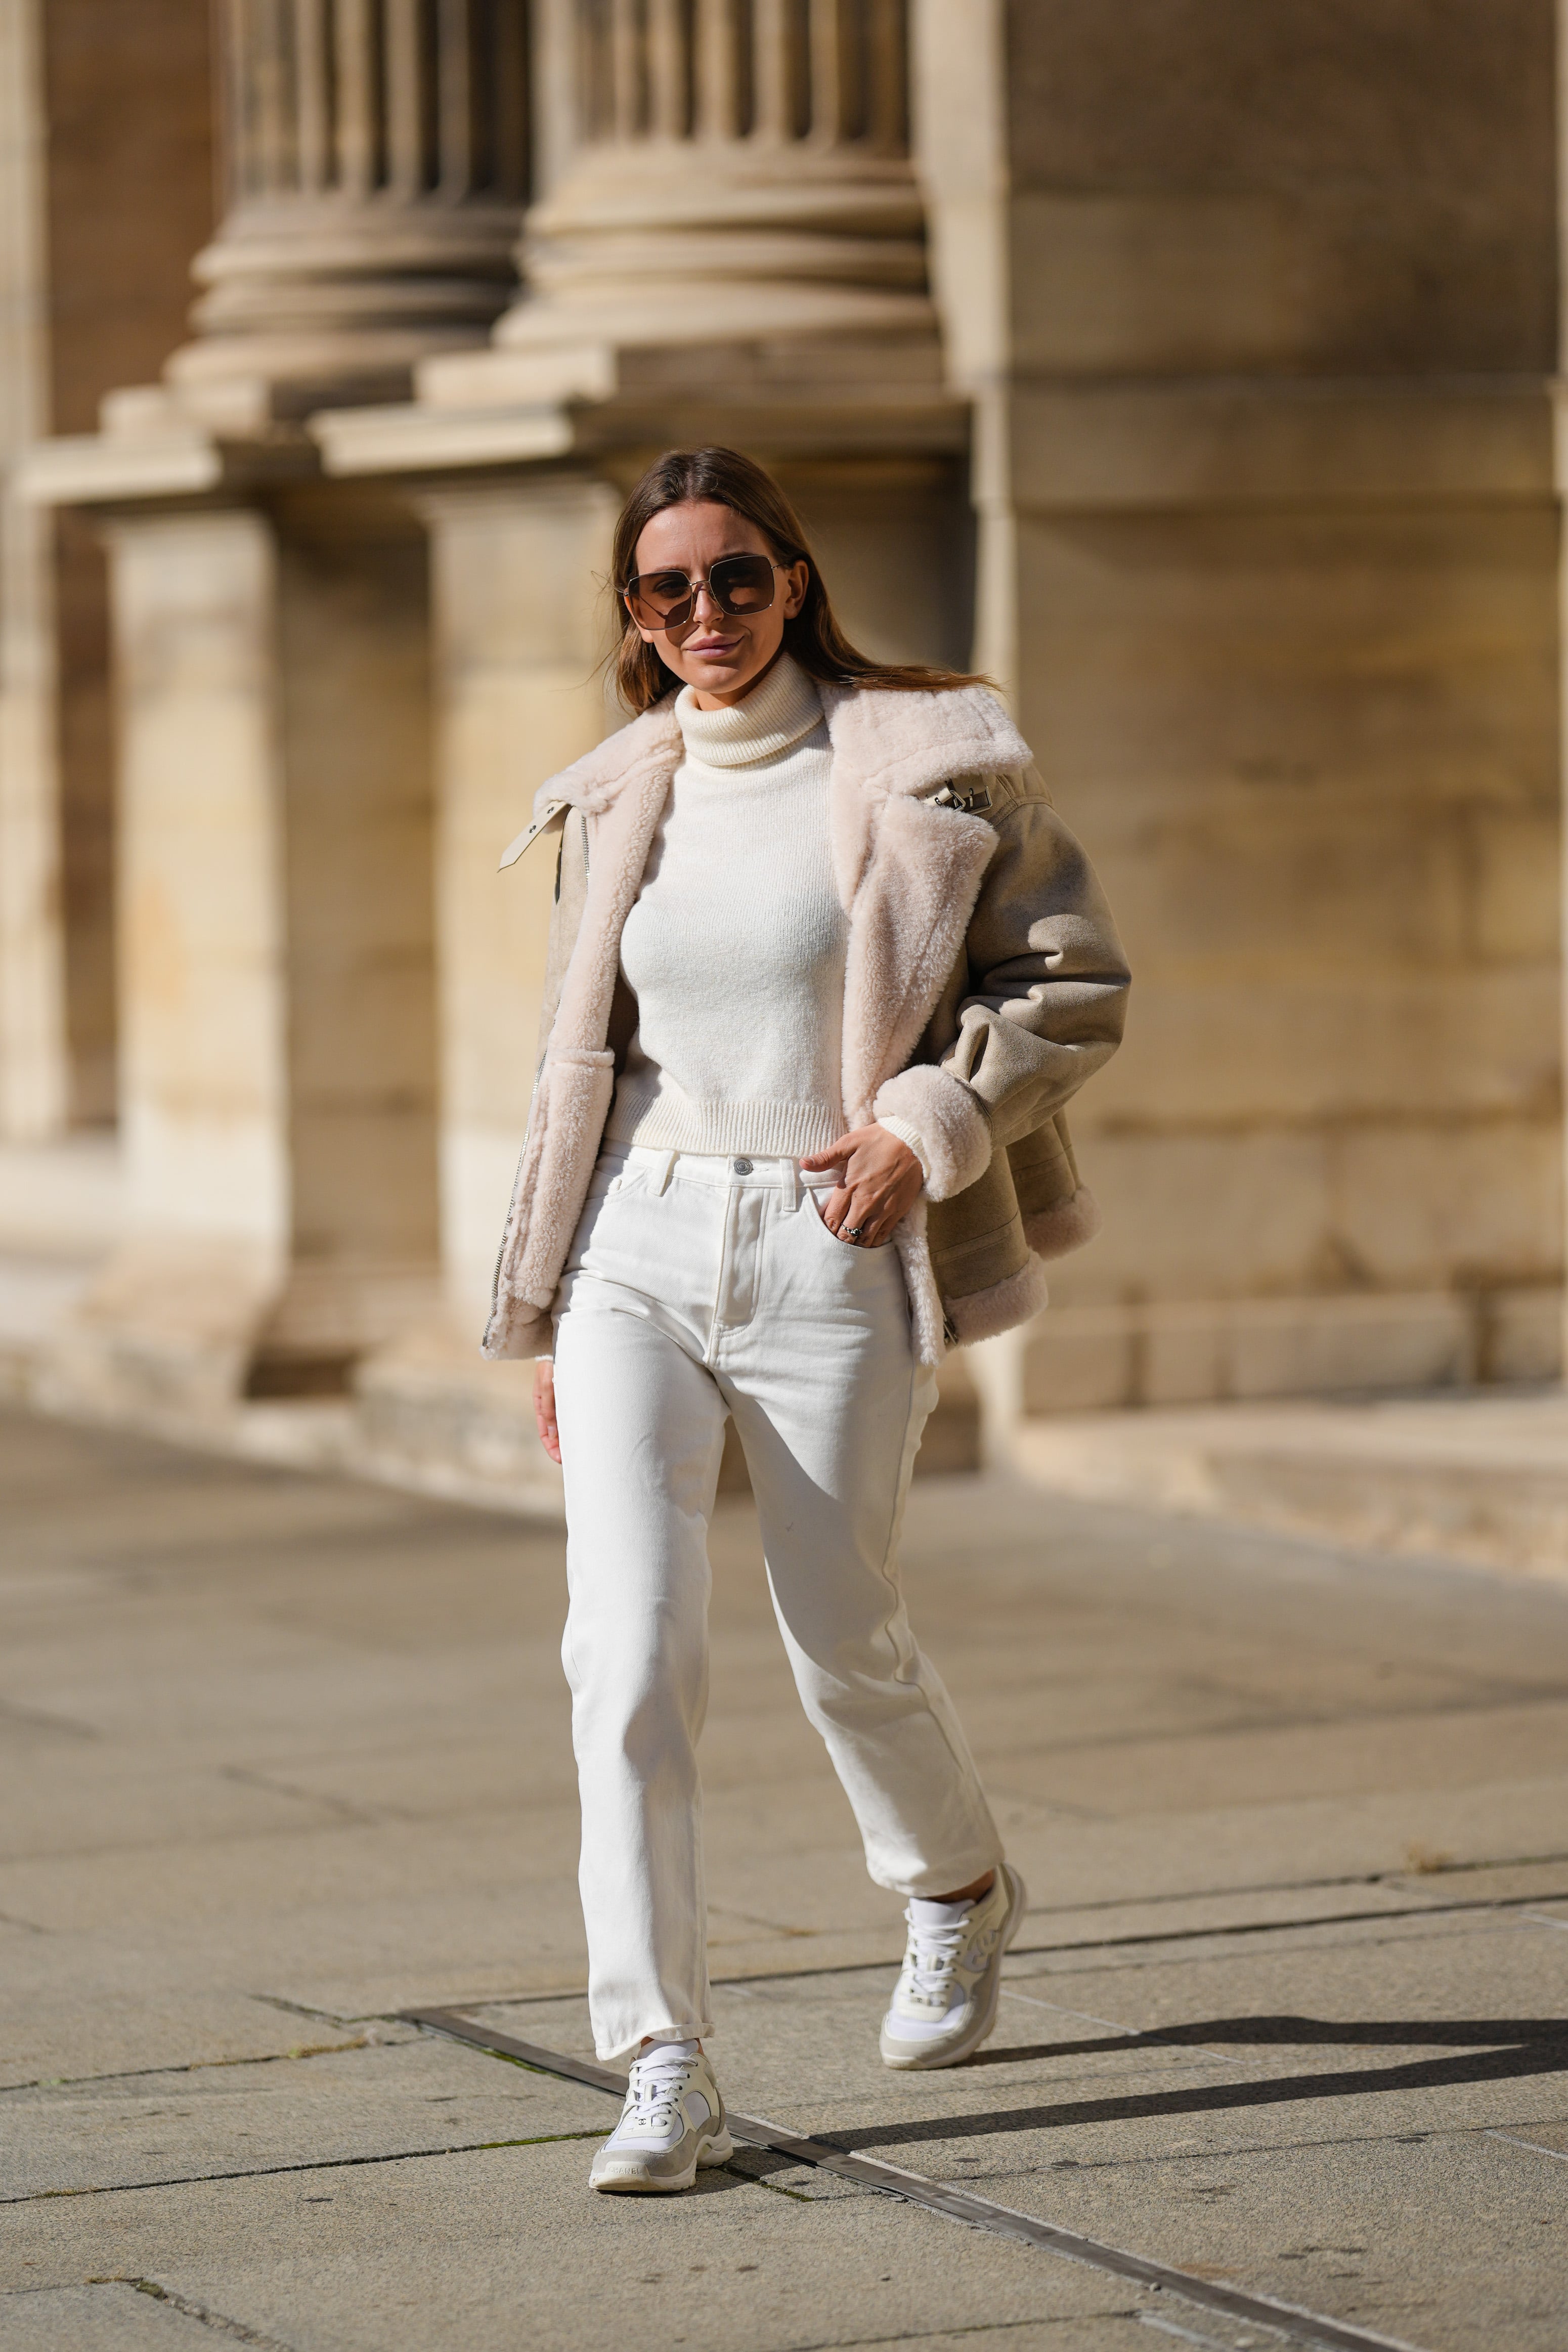 A Cozy Winter White Outfit, Winter Fashion